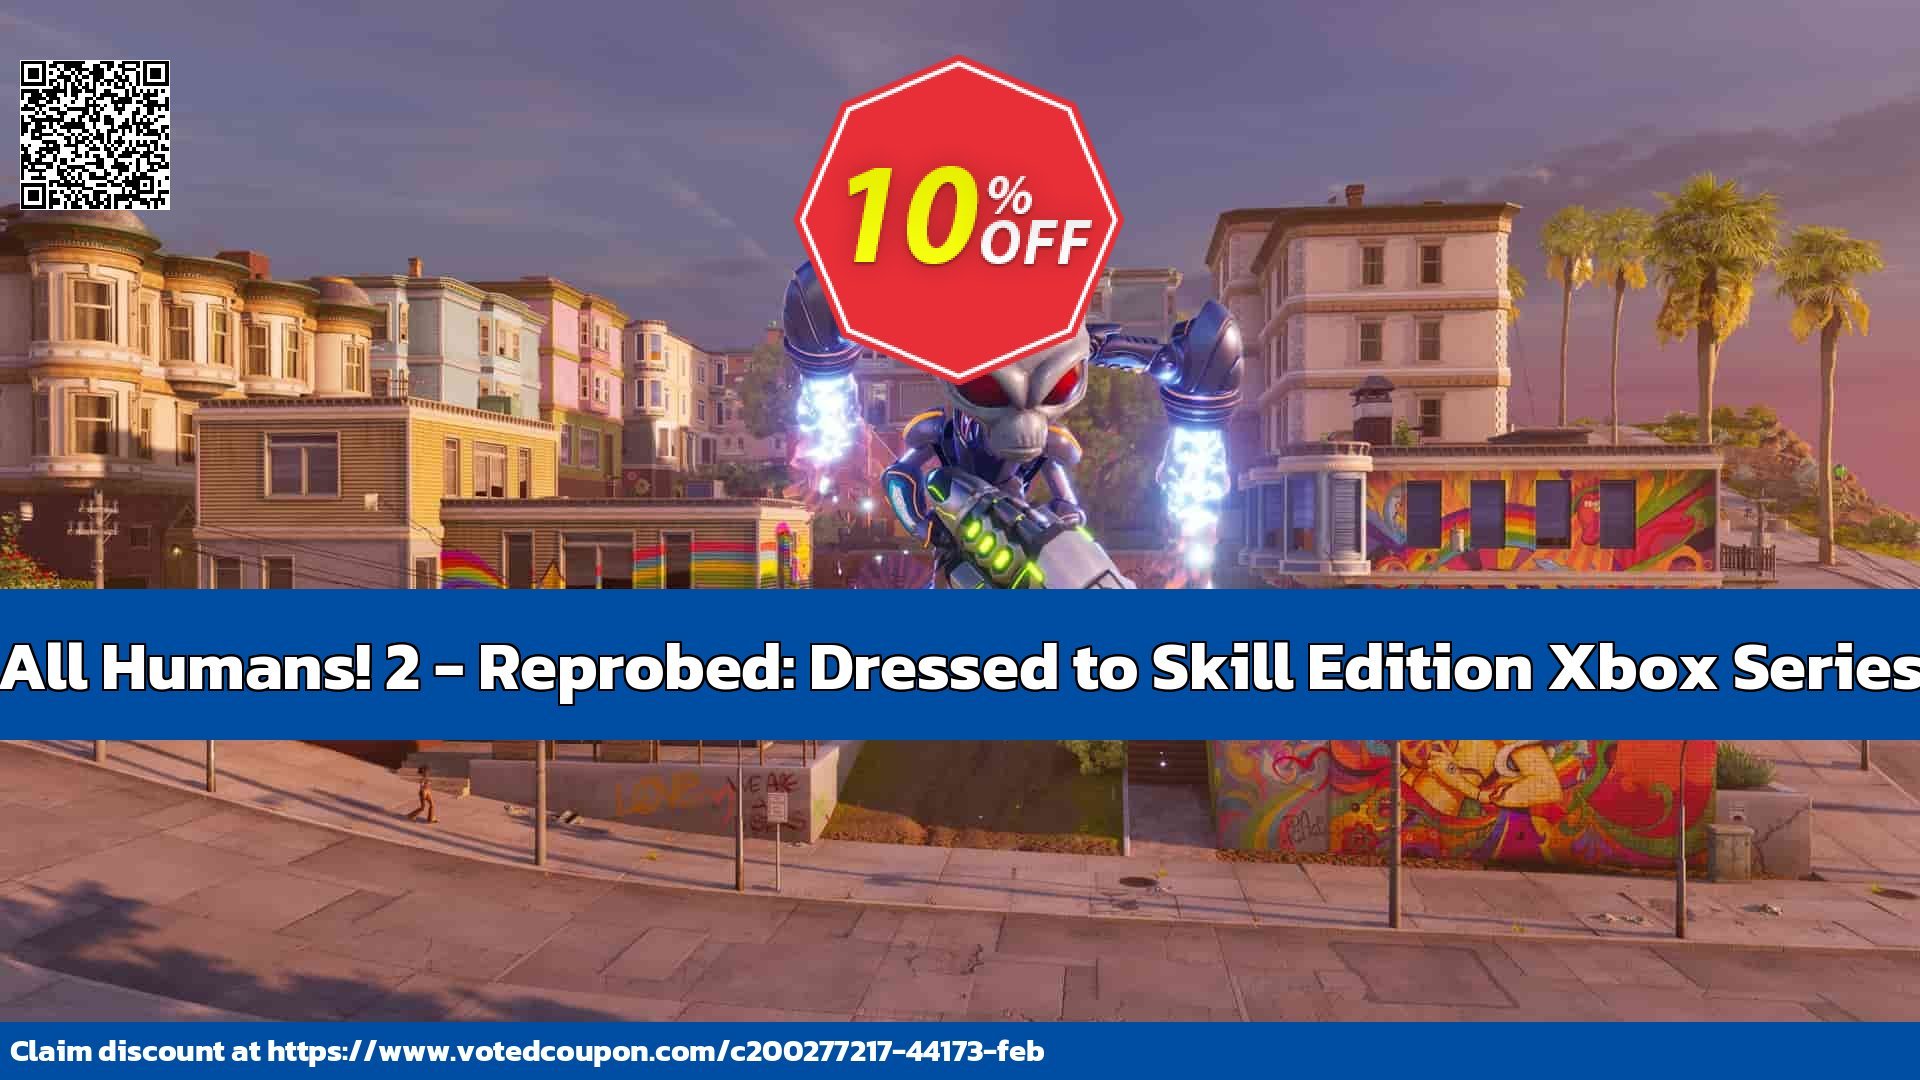 Destroy All Humans! 2 - Reprobed: Dressed to Skill Edition Xbox Series X|S, US  voted-on promotion codes